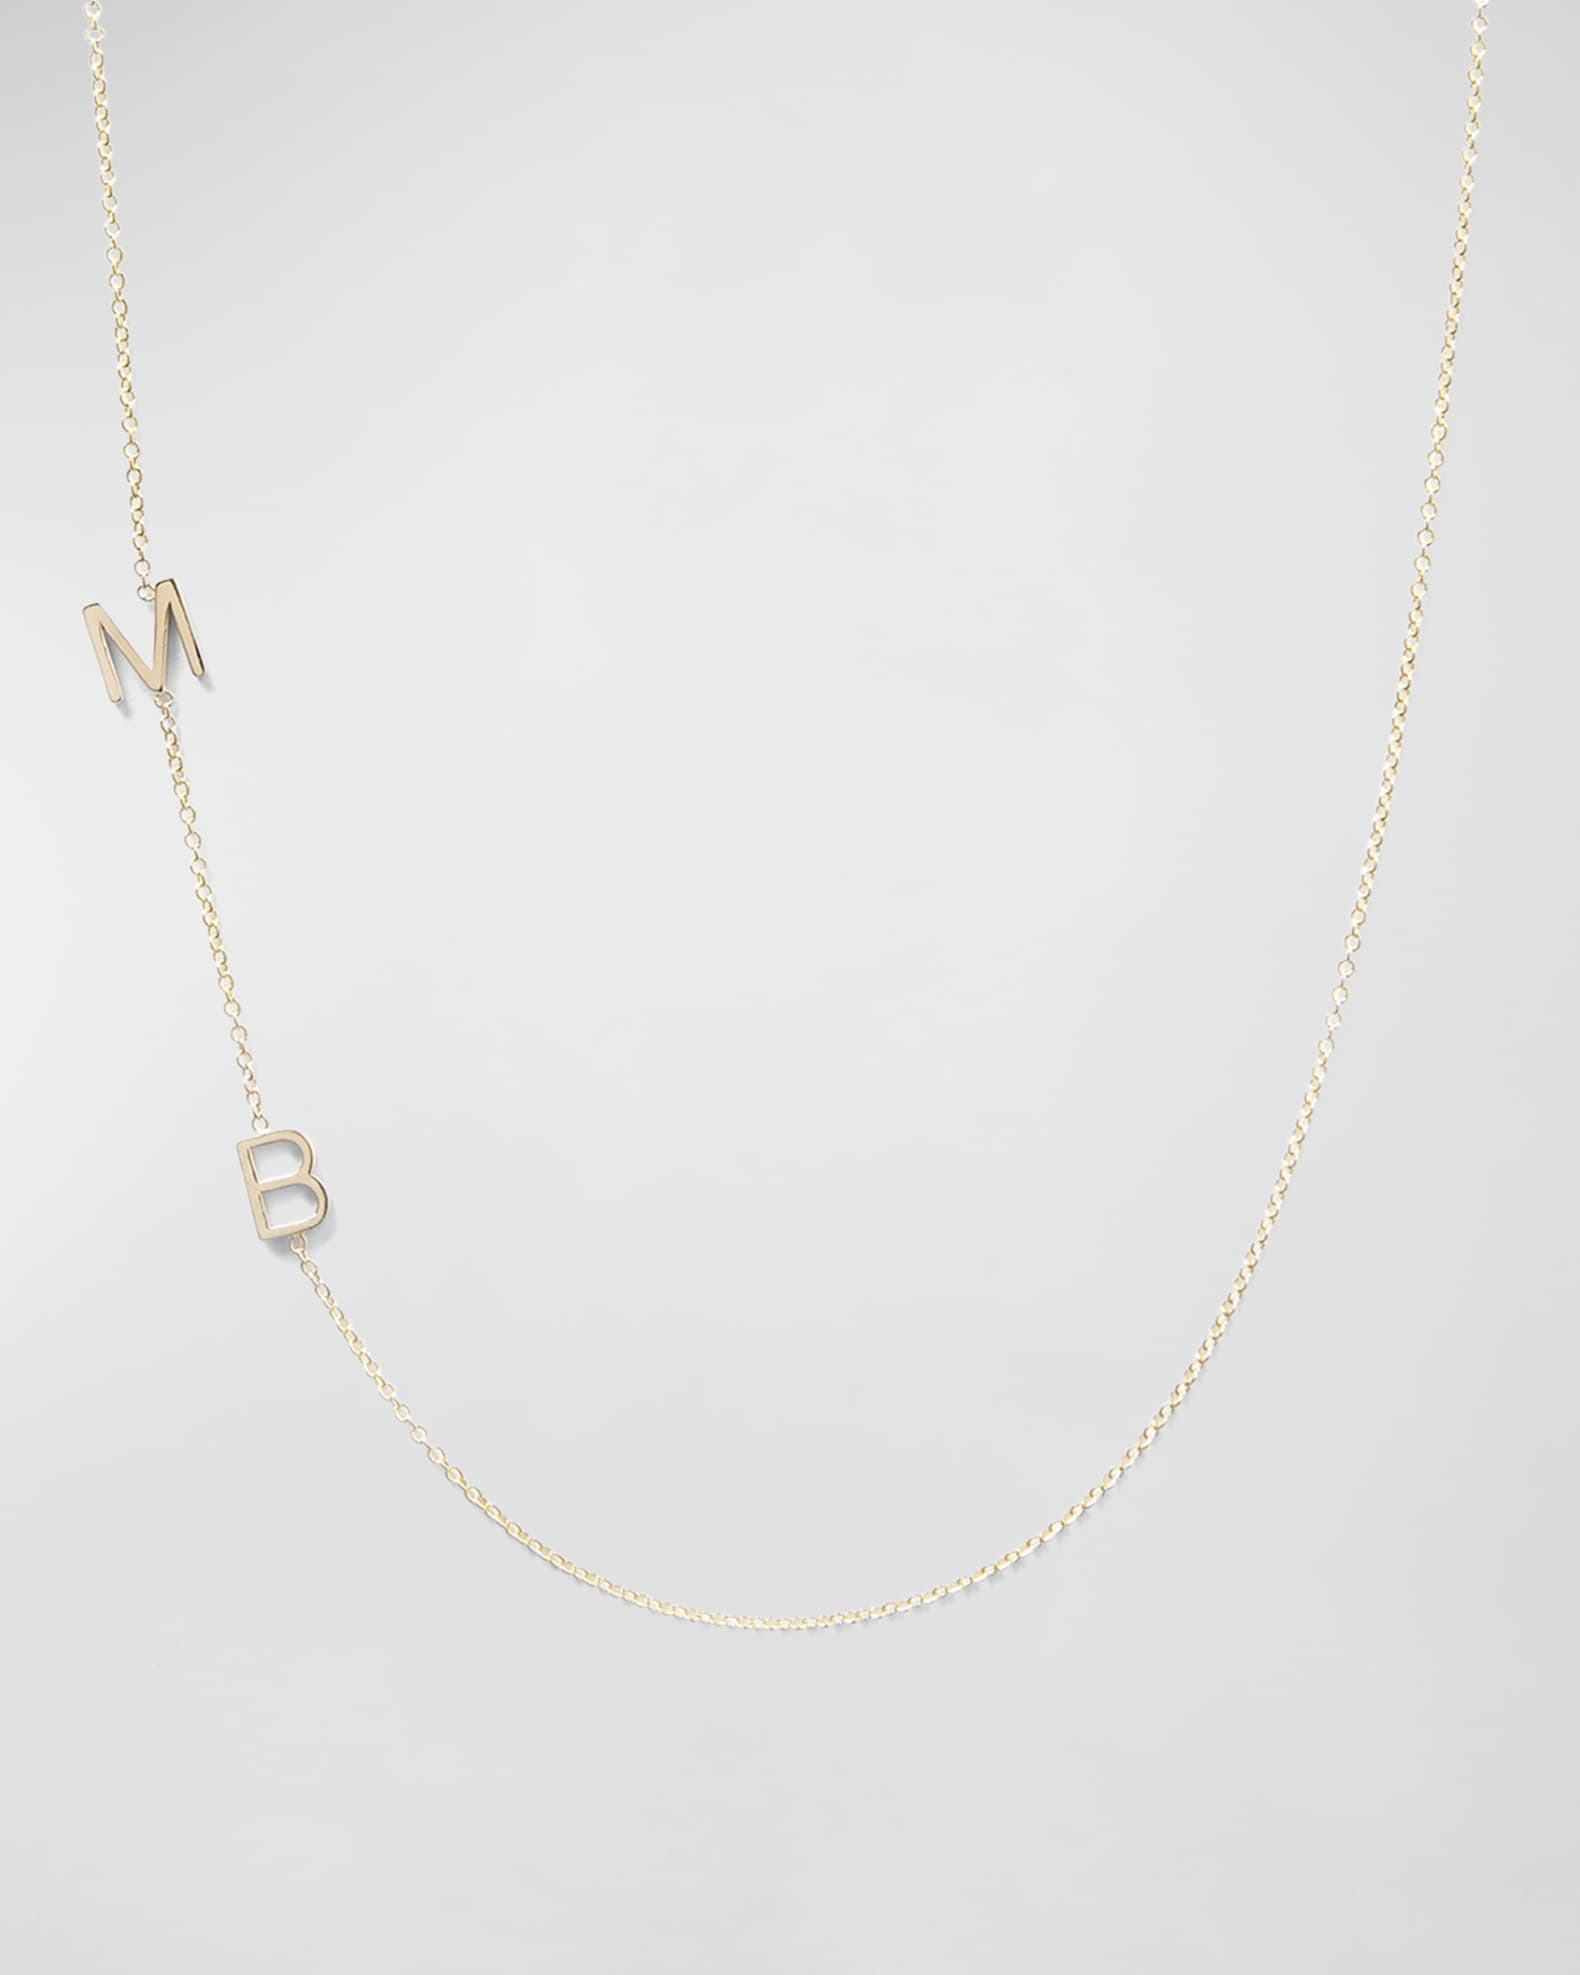 Two Initials Necklace Double Letters Pendant Mothers -   Gold initial  pendant, Initial necklace, Initial necklace gold